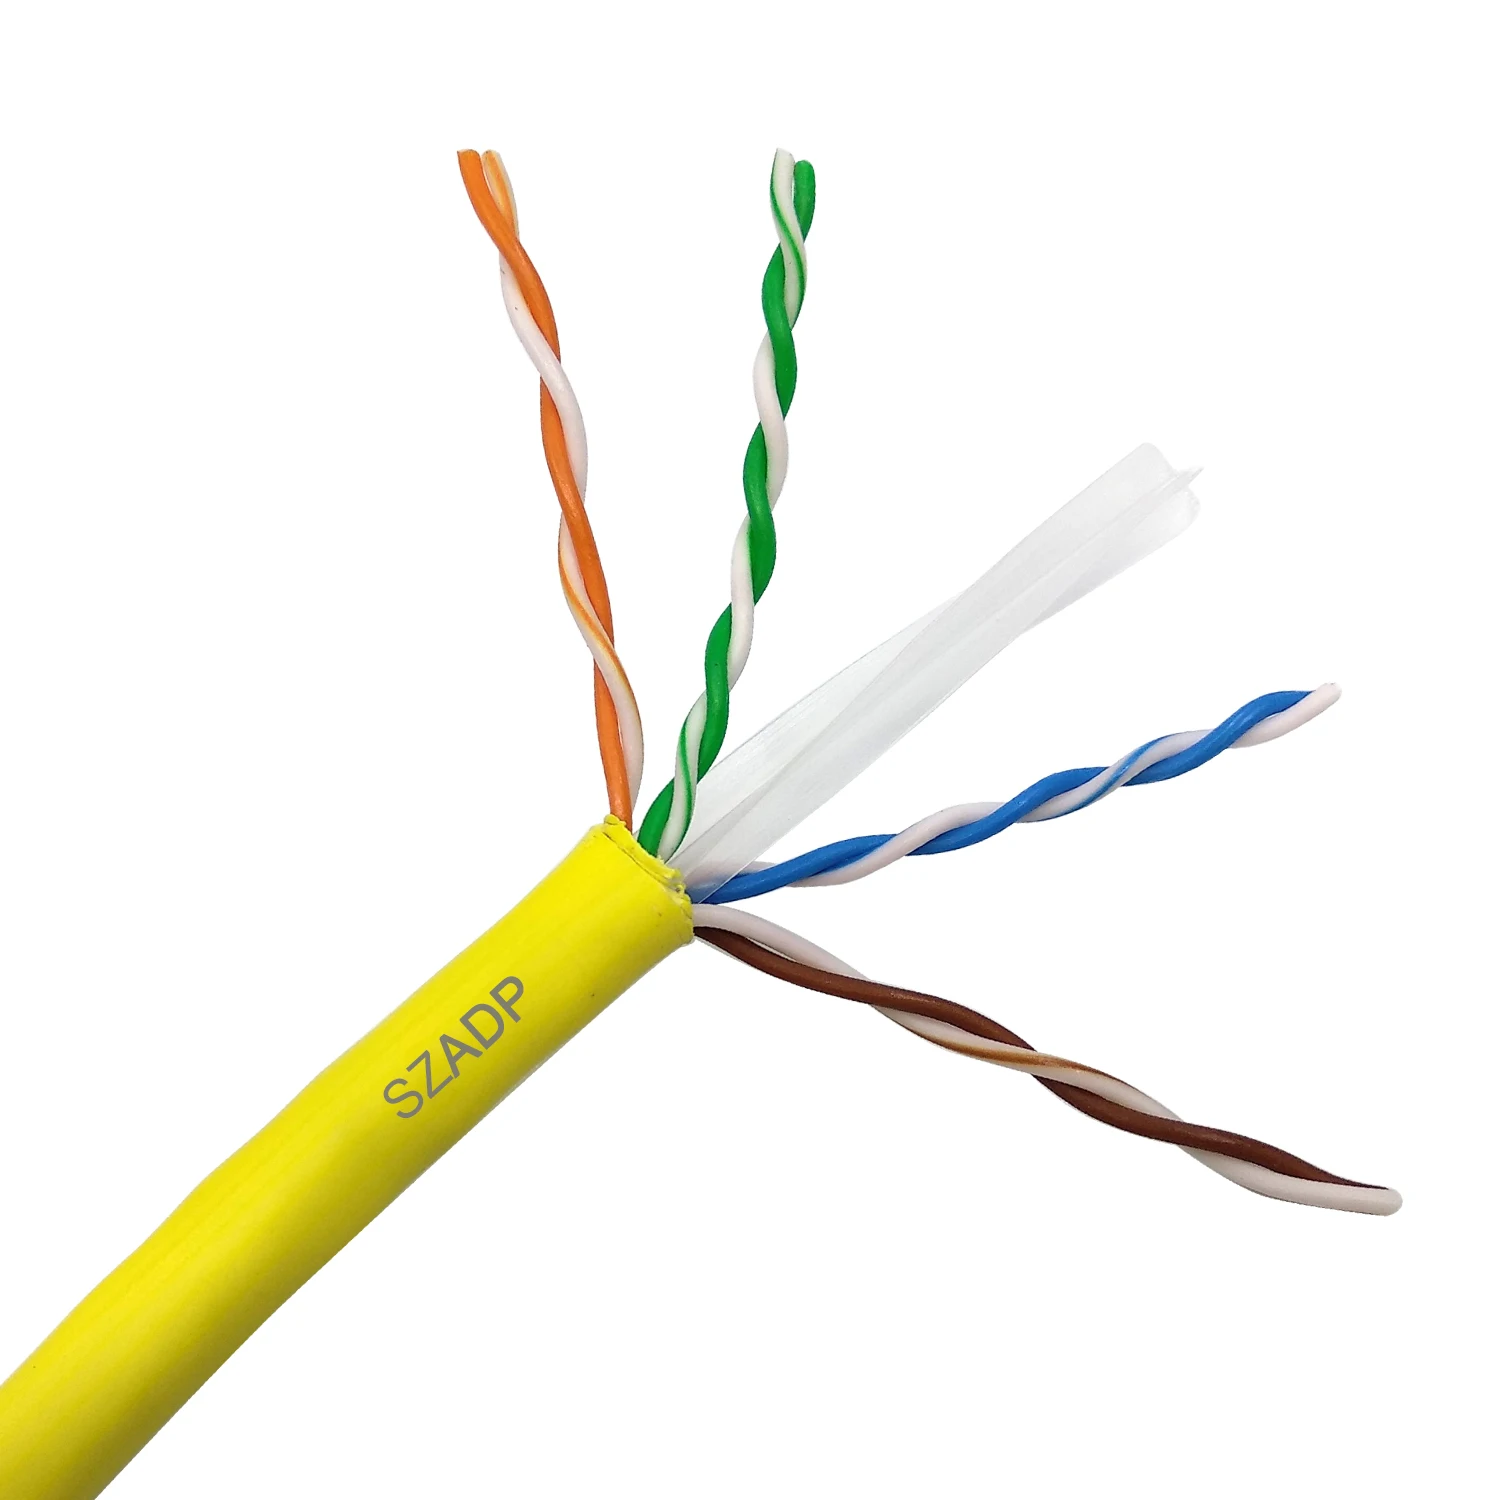 Utp Cat6 22awg Cable Hcca Conductor Pvc/lszh Jacket Cat6e Cable Lan Cable 305m Unshielded 26 Cat6 Utp Keystone Jack Modular - Buy Cat6e Cat6 Lan Cable 305m Utp Cat6 305m,High Quality